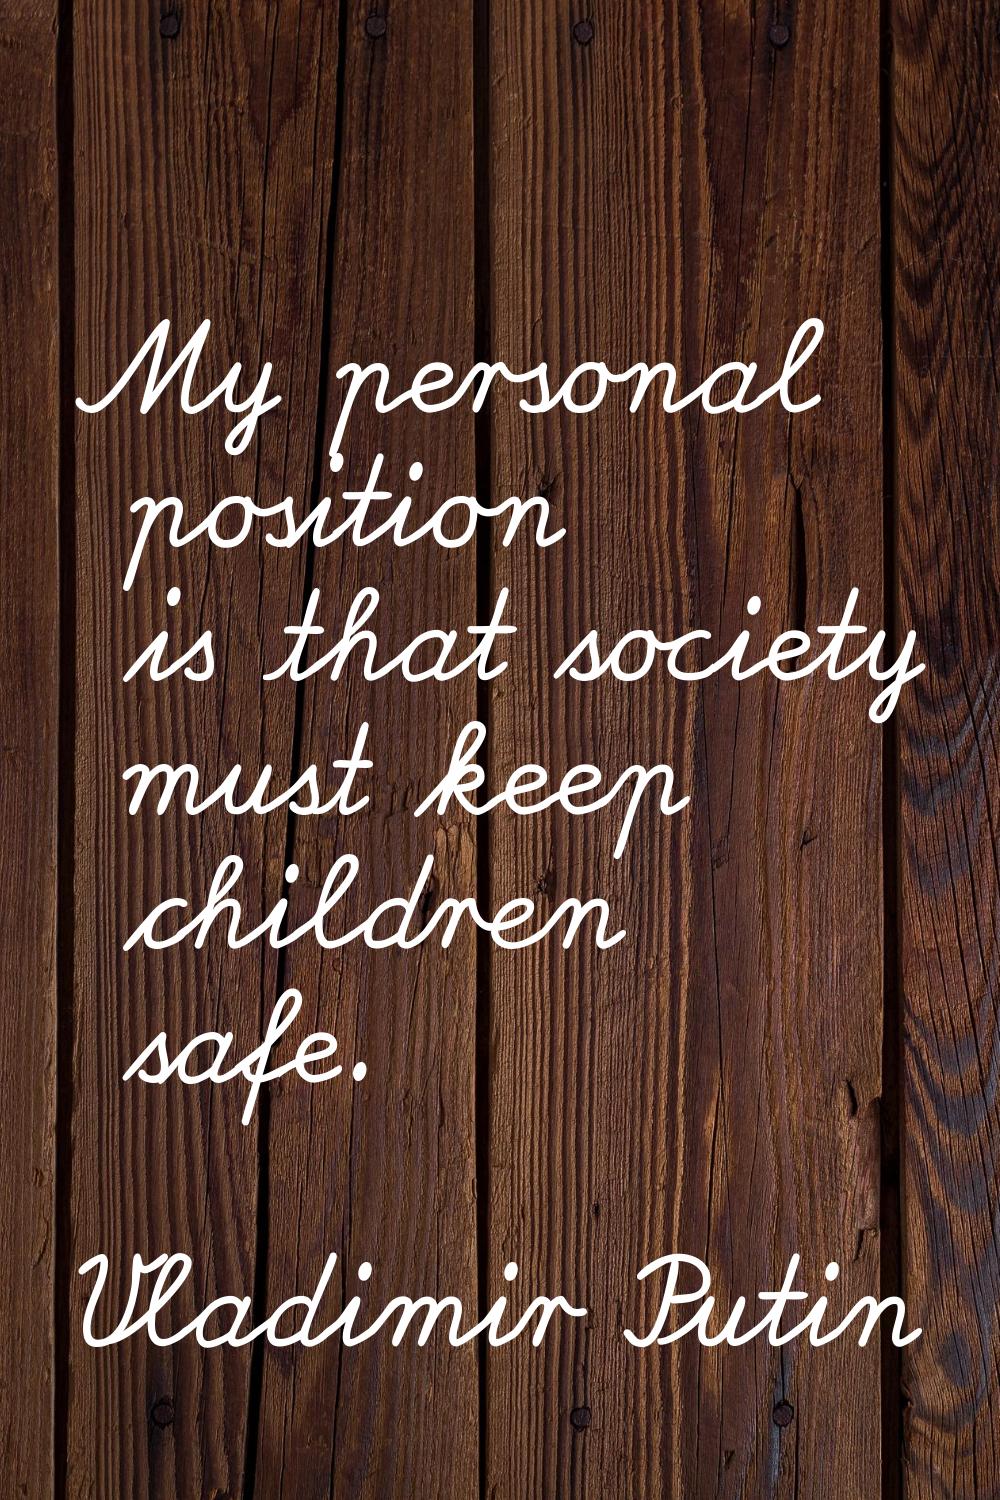 My personal position is that society must keep children safe.